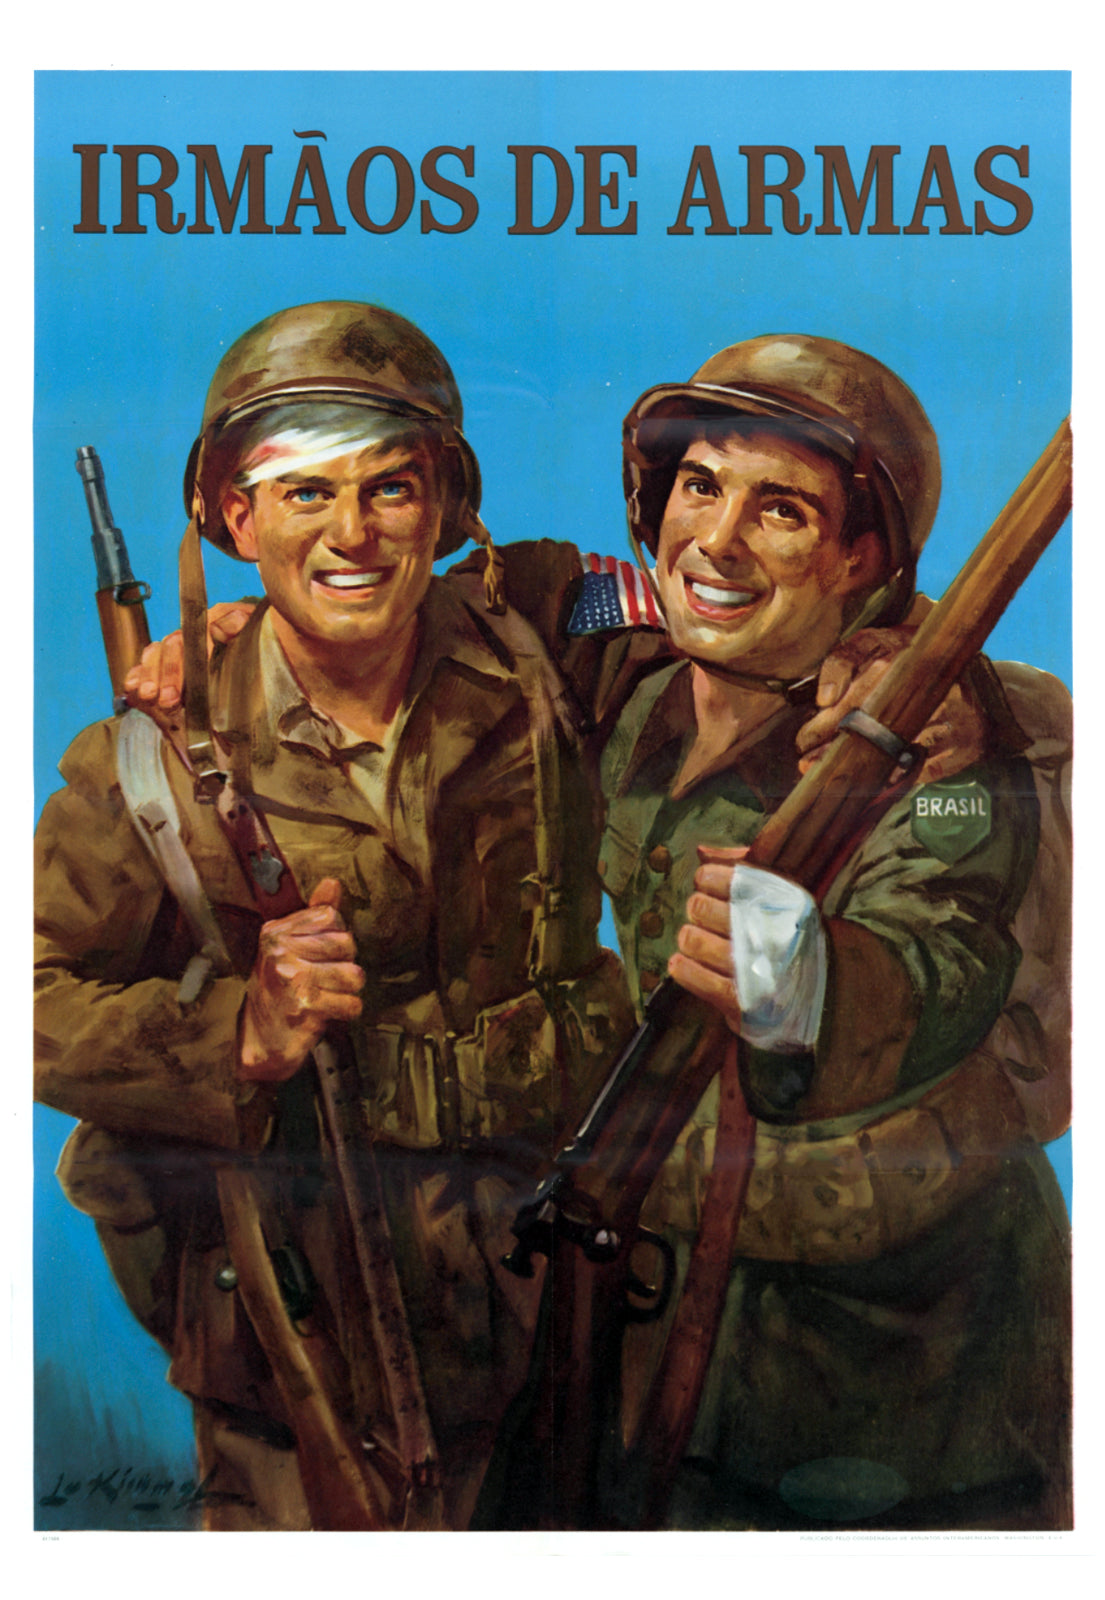 Brothers in Arms — American World War Two poster